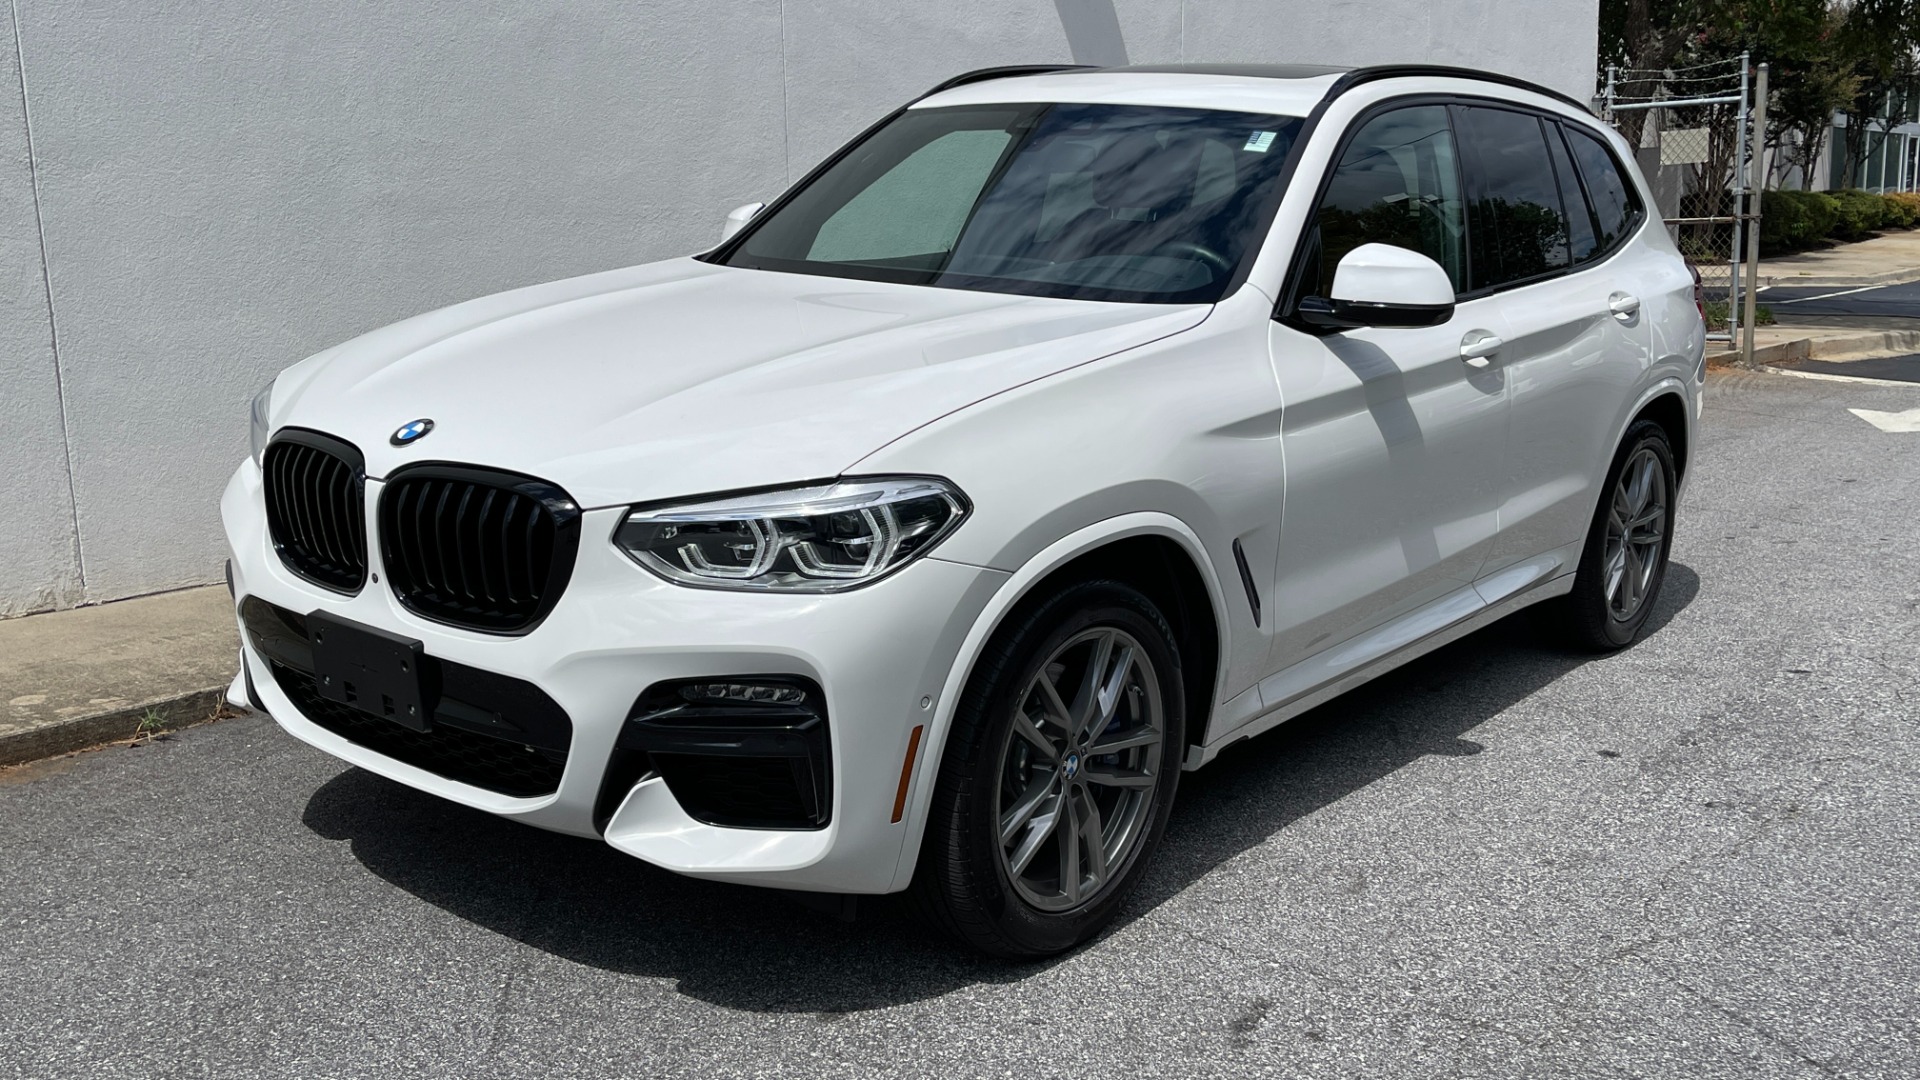 Used 2021 BMW X3 M40i / EXECUTIVE PACKAGE / SHADOWLINE TRIM / HEADS UP DISPLAY / AMBIENT LIG for sale $57,392 at Formula Imports in Charlotte NC 28227 1